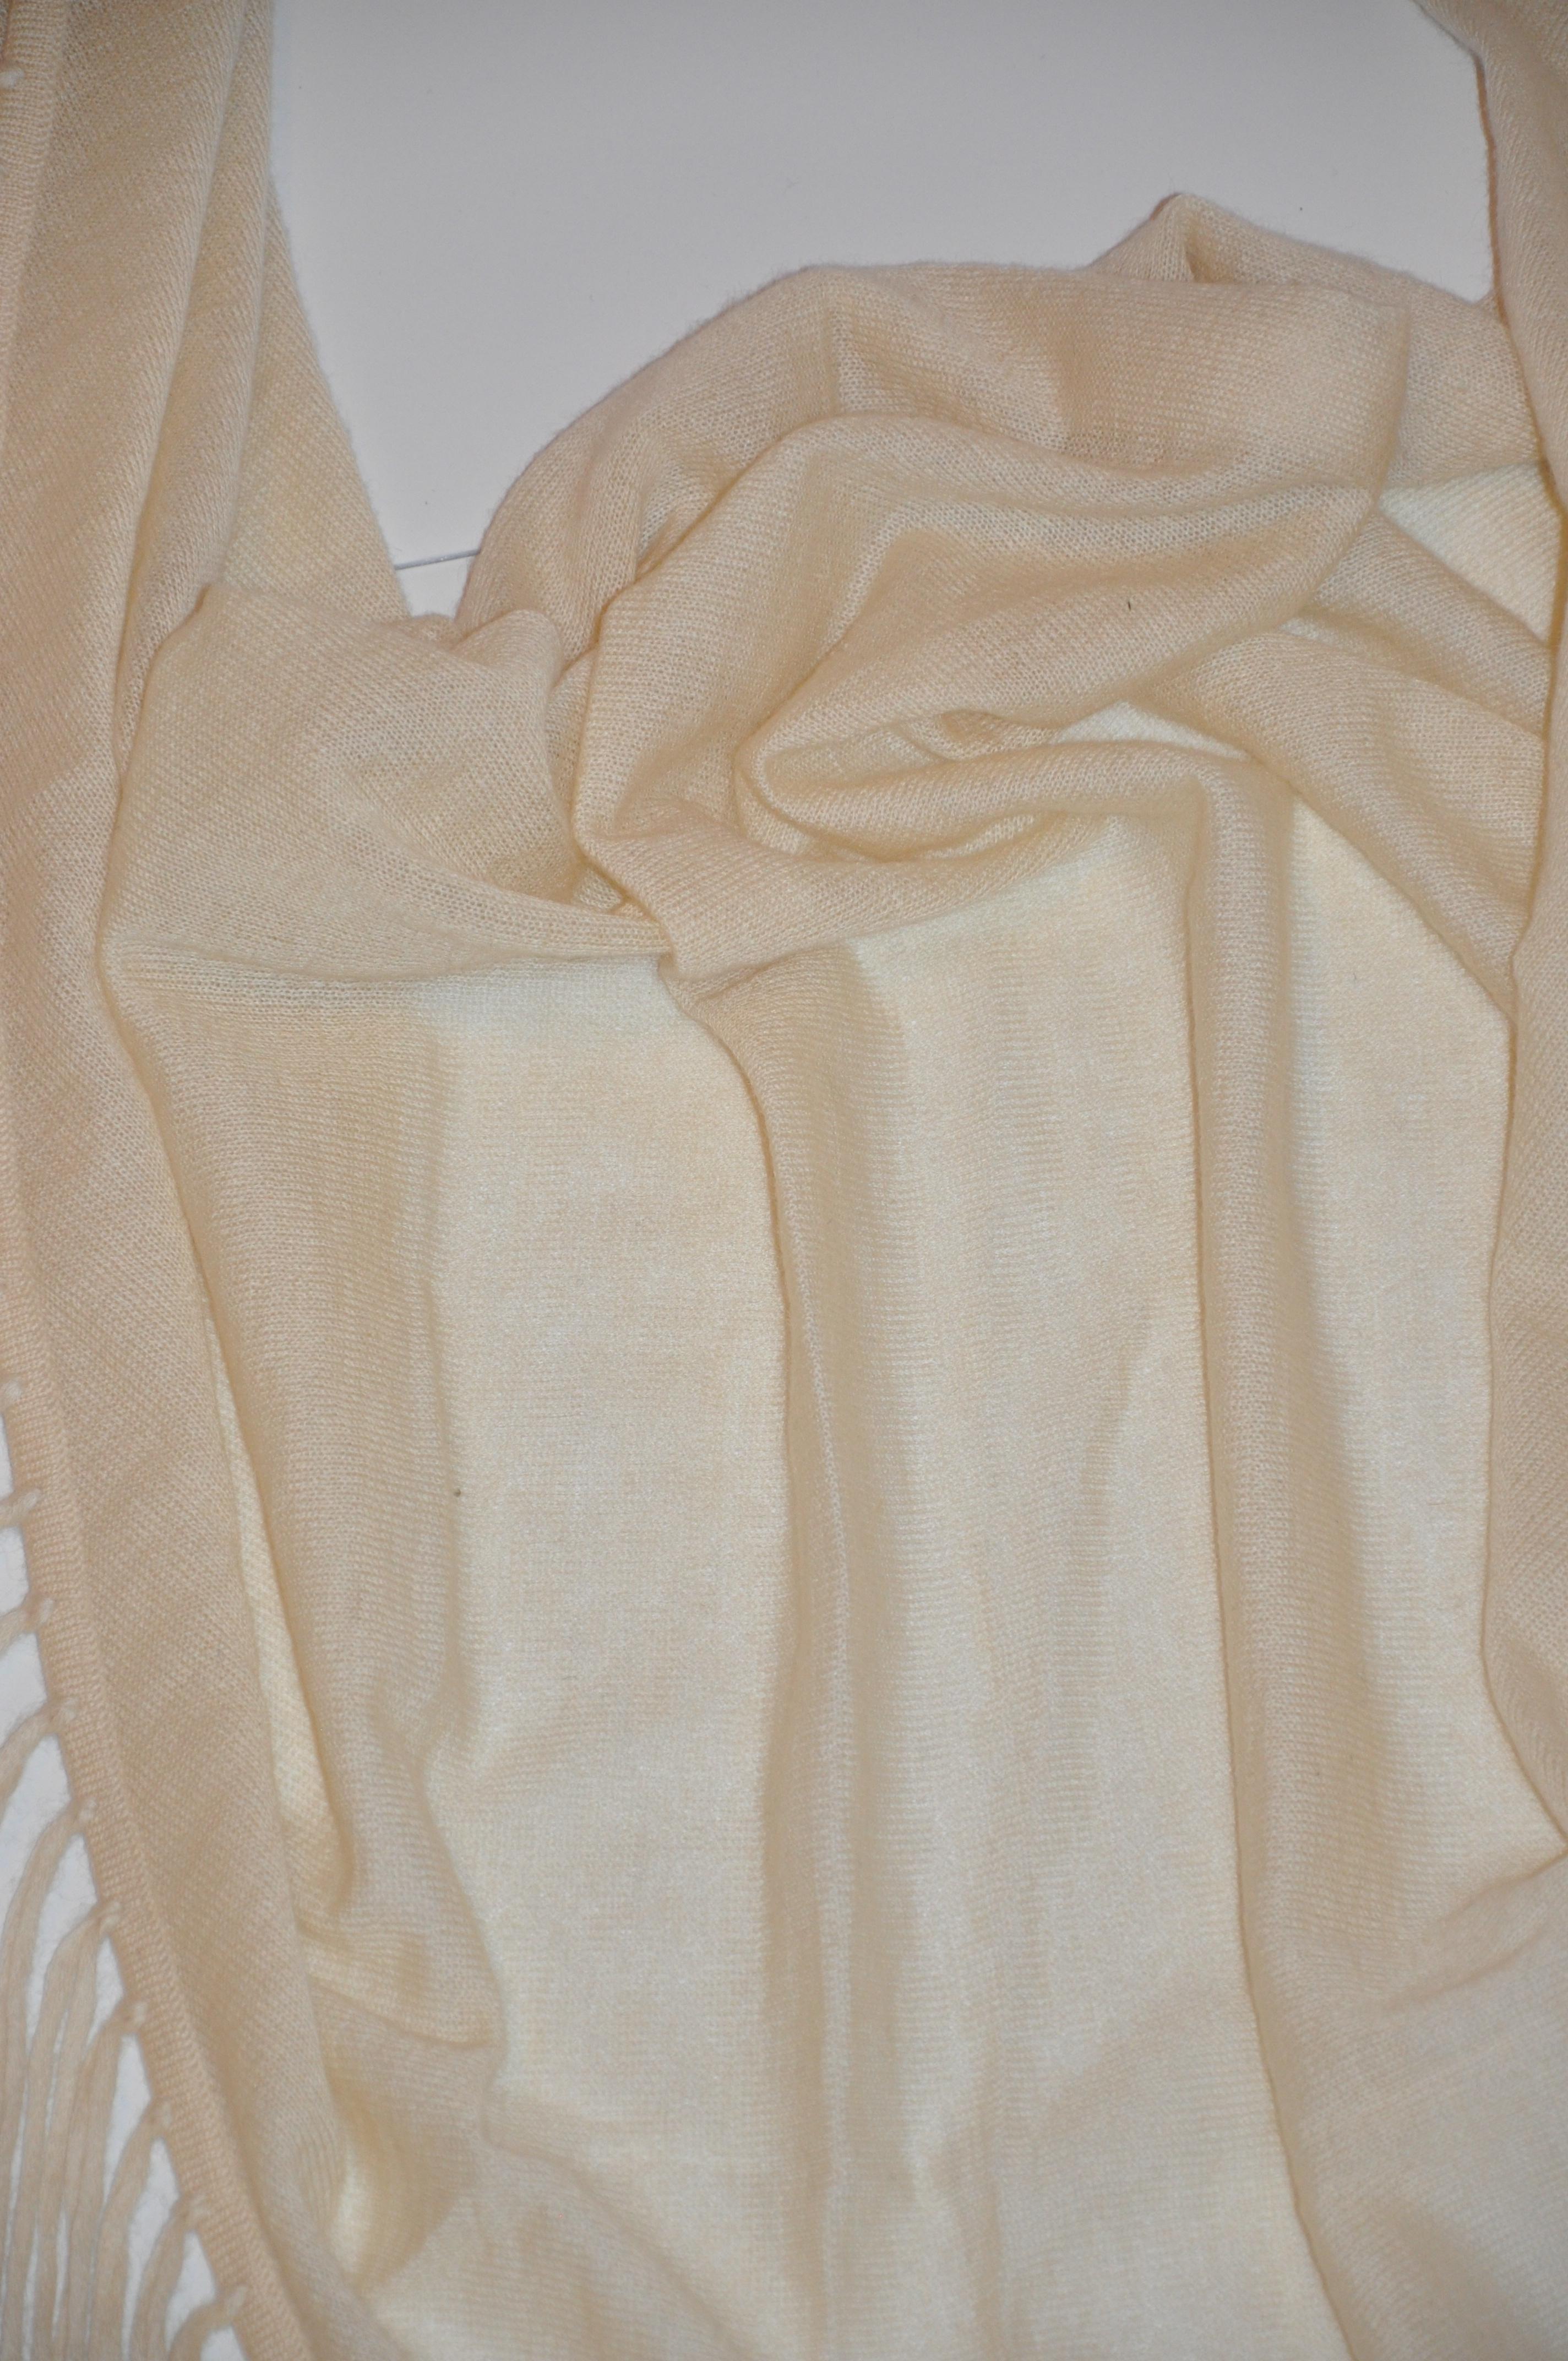 Bottega Veneta Cream Woven Cashmere and Mohair Deconstructed Fringed Scarf  For Sale 1